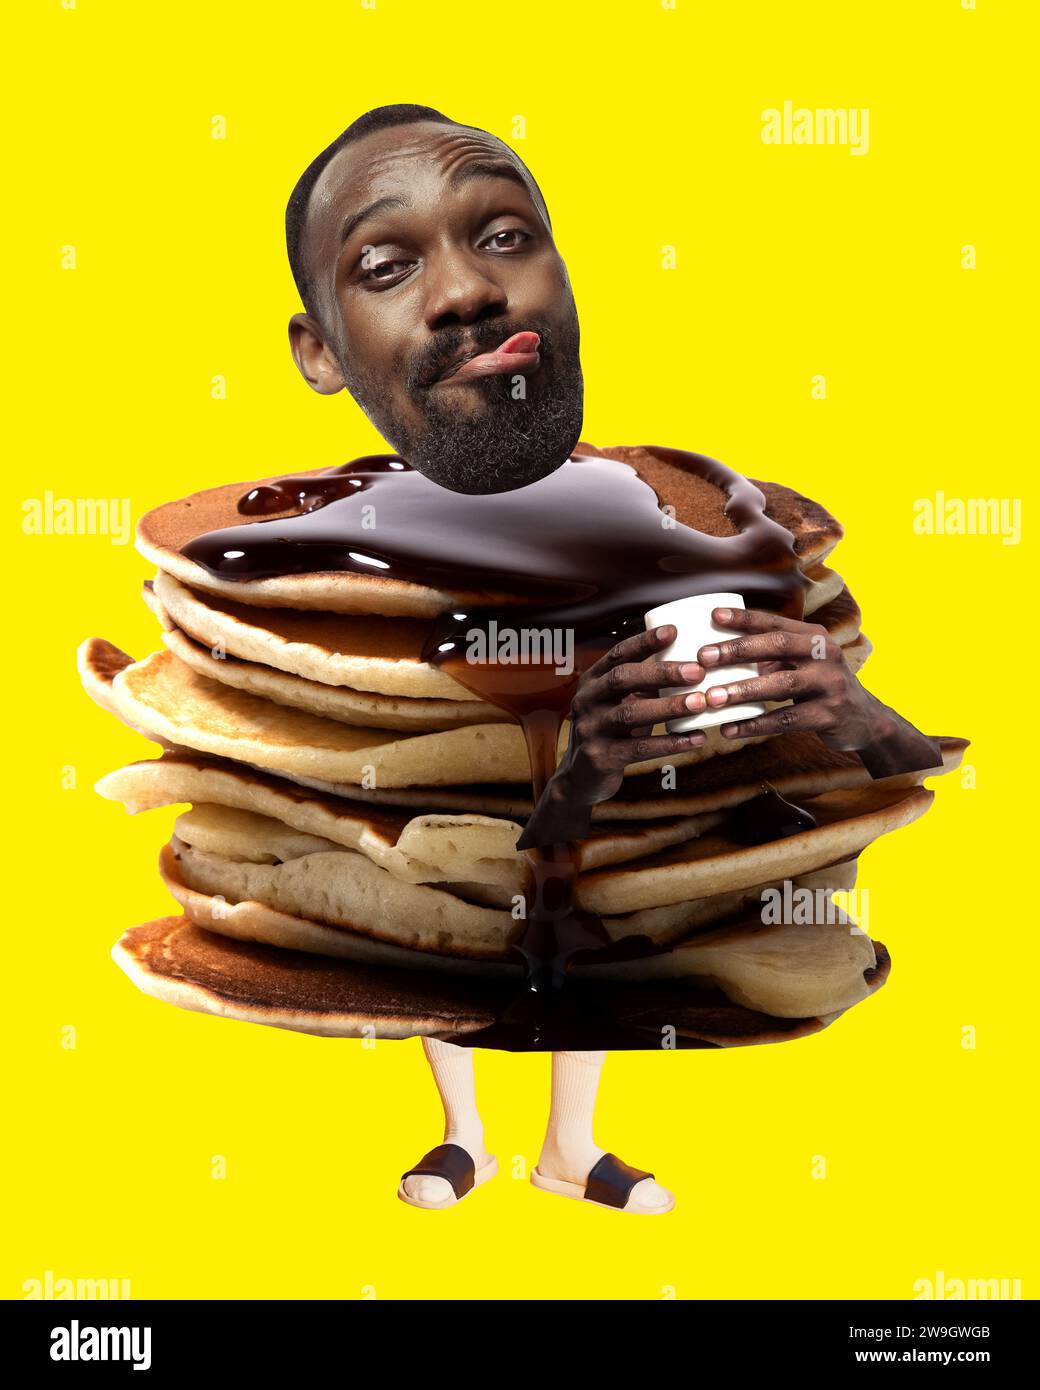 Dessert and confectionery. African man enjoying eating delicious sweet pancakes with chocolate taste. Contemporary art collage. Stock Photo